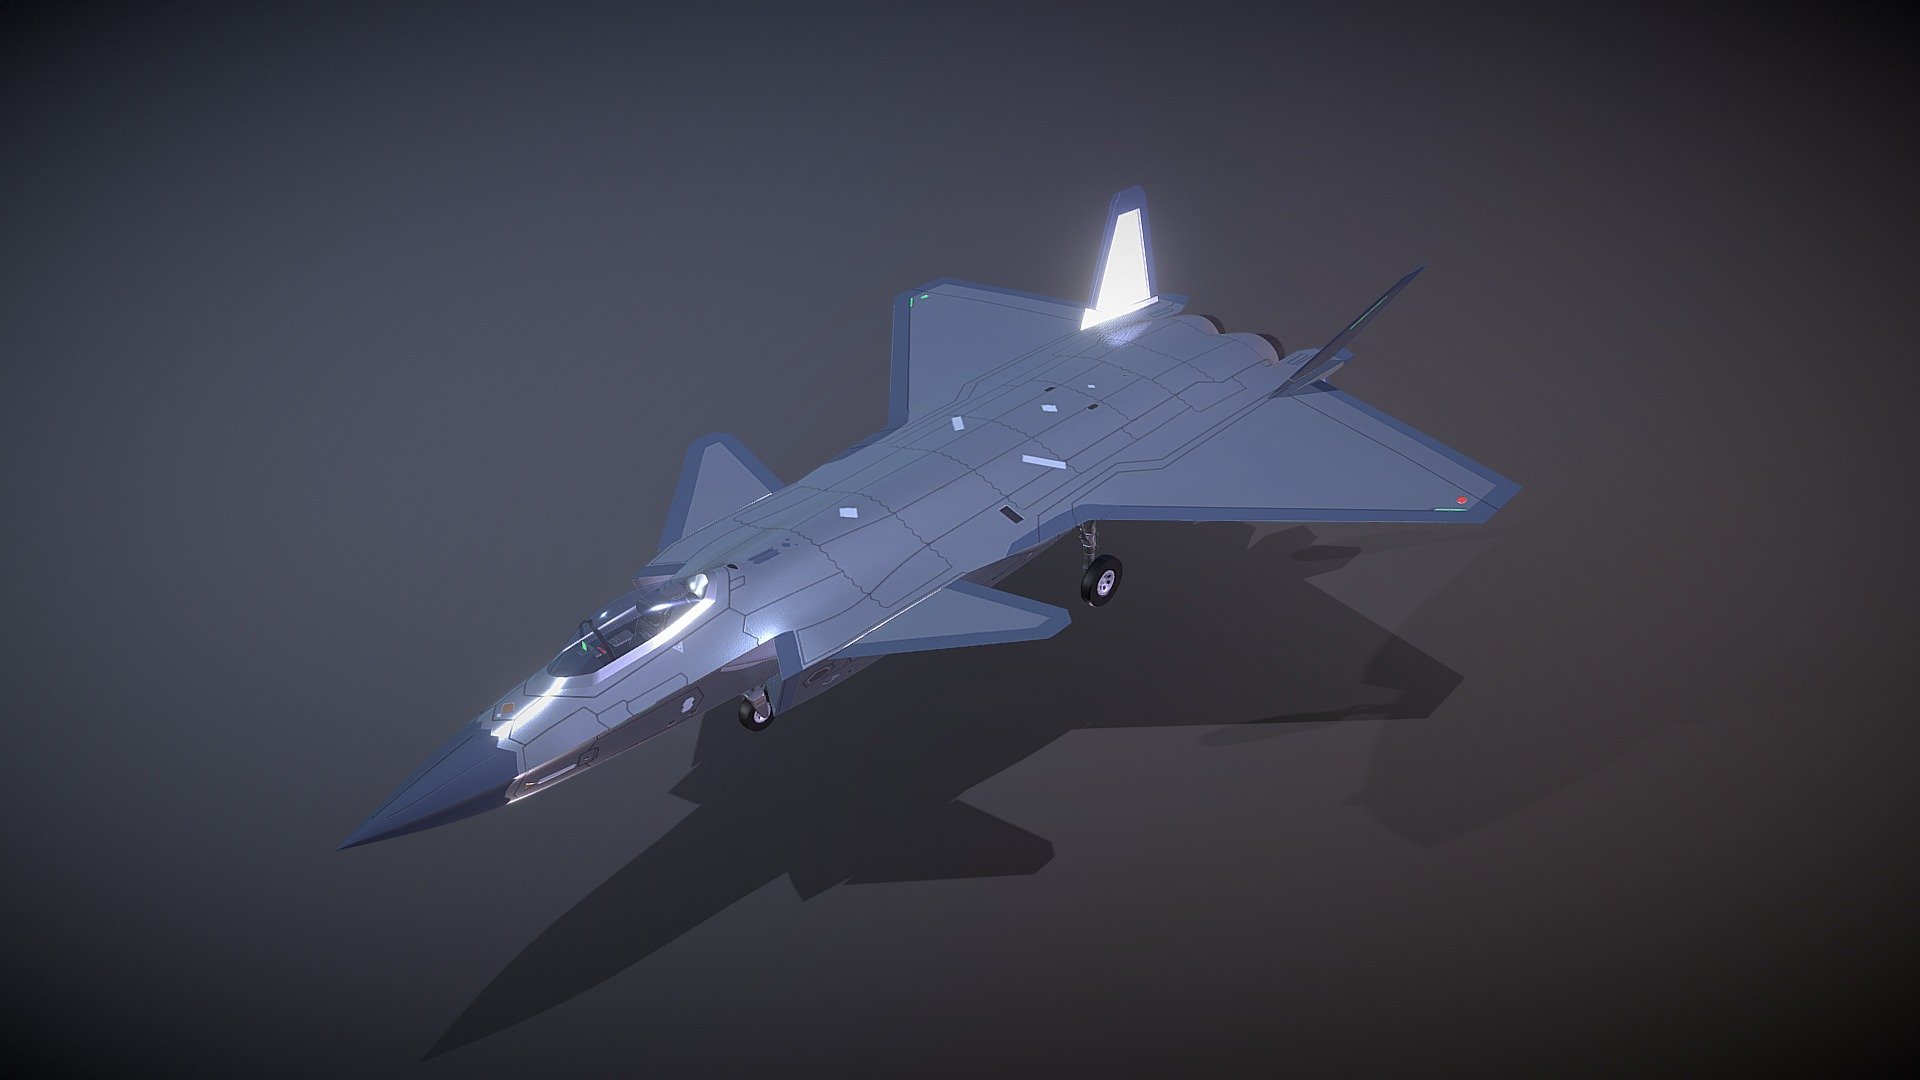 Based on the China's &lsquo;Chengdu' J-20 5th generation stealth jet fighter.
Polycount: 55,834
Triangles: 110,777
Objects: 35
PBR textured in Substance Painter. Mesh and texture only 3d model